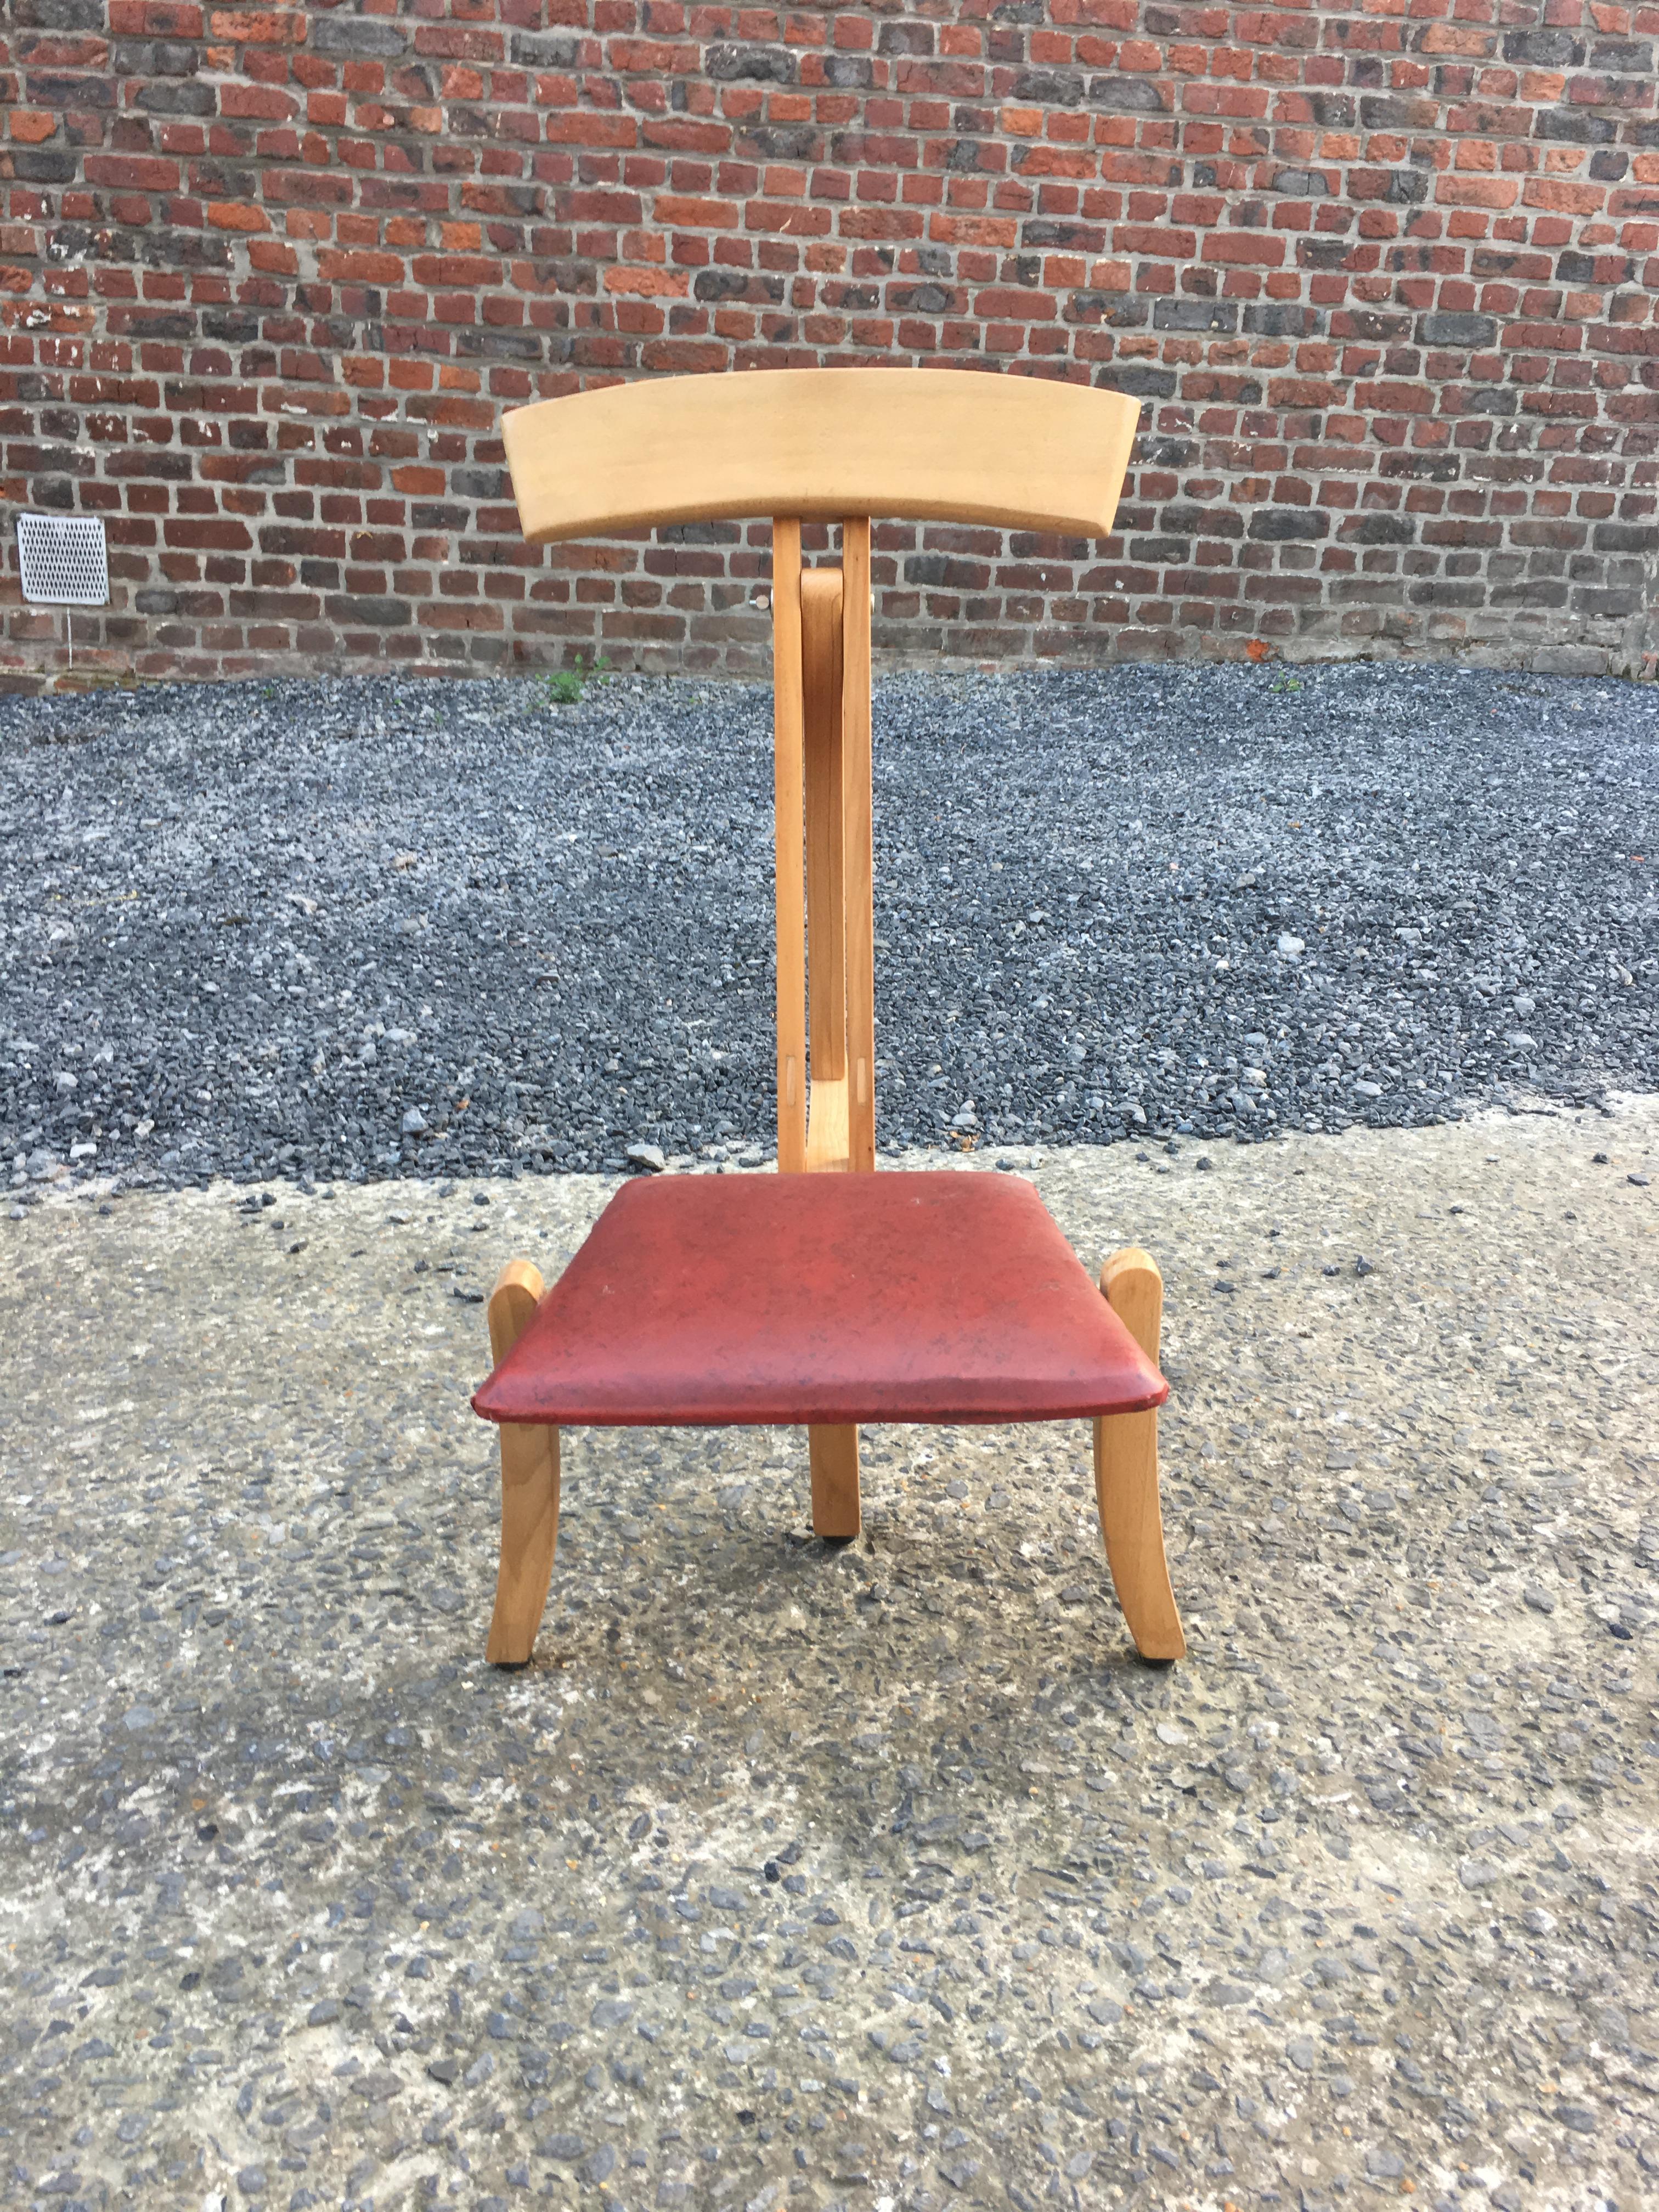 Funny prototype chair with system, circa 1970-1980.